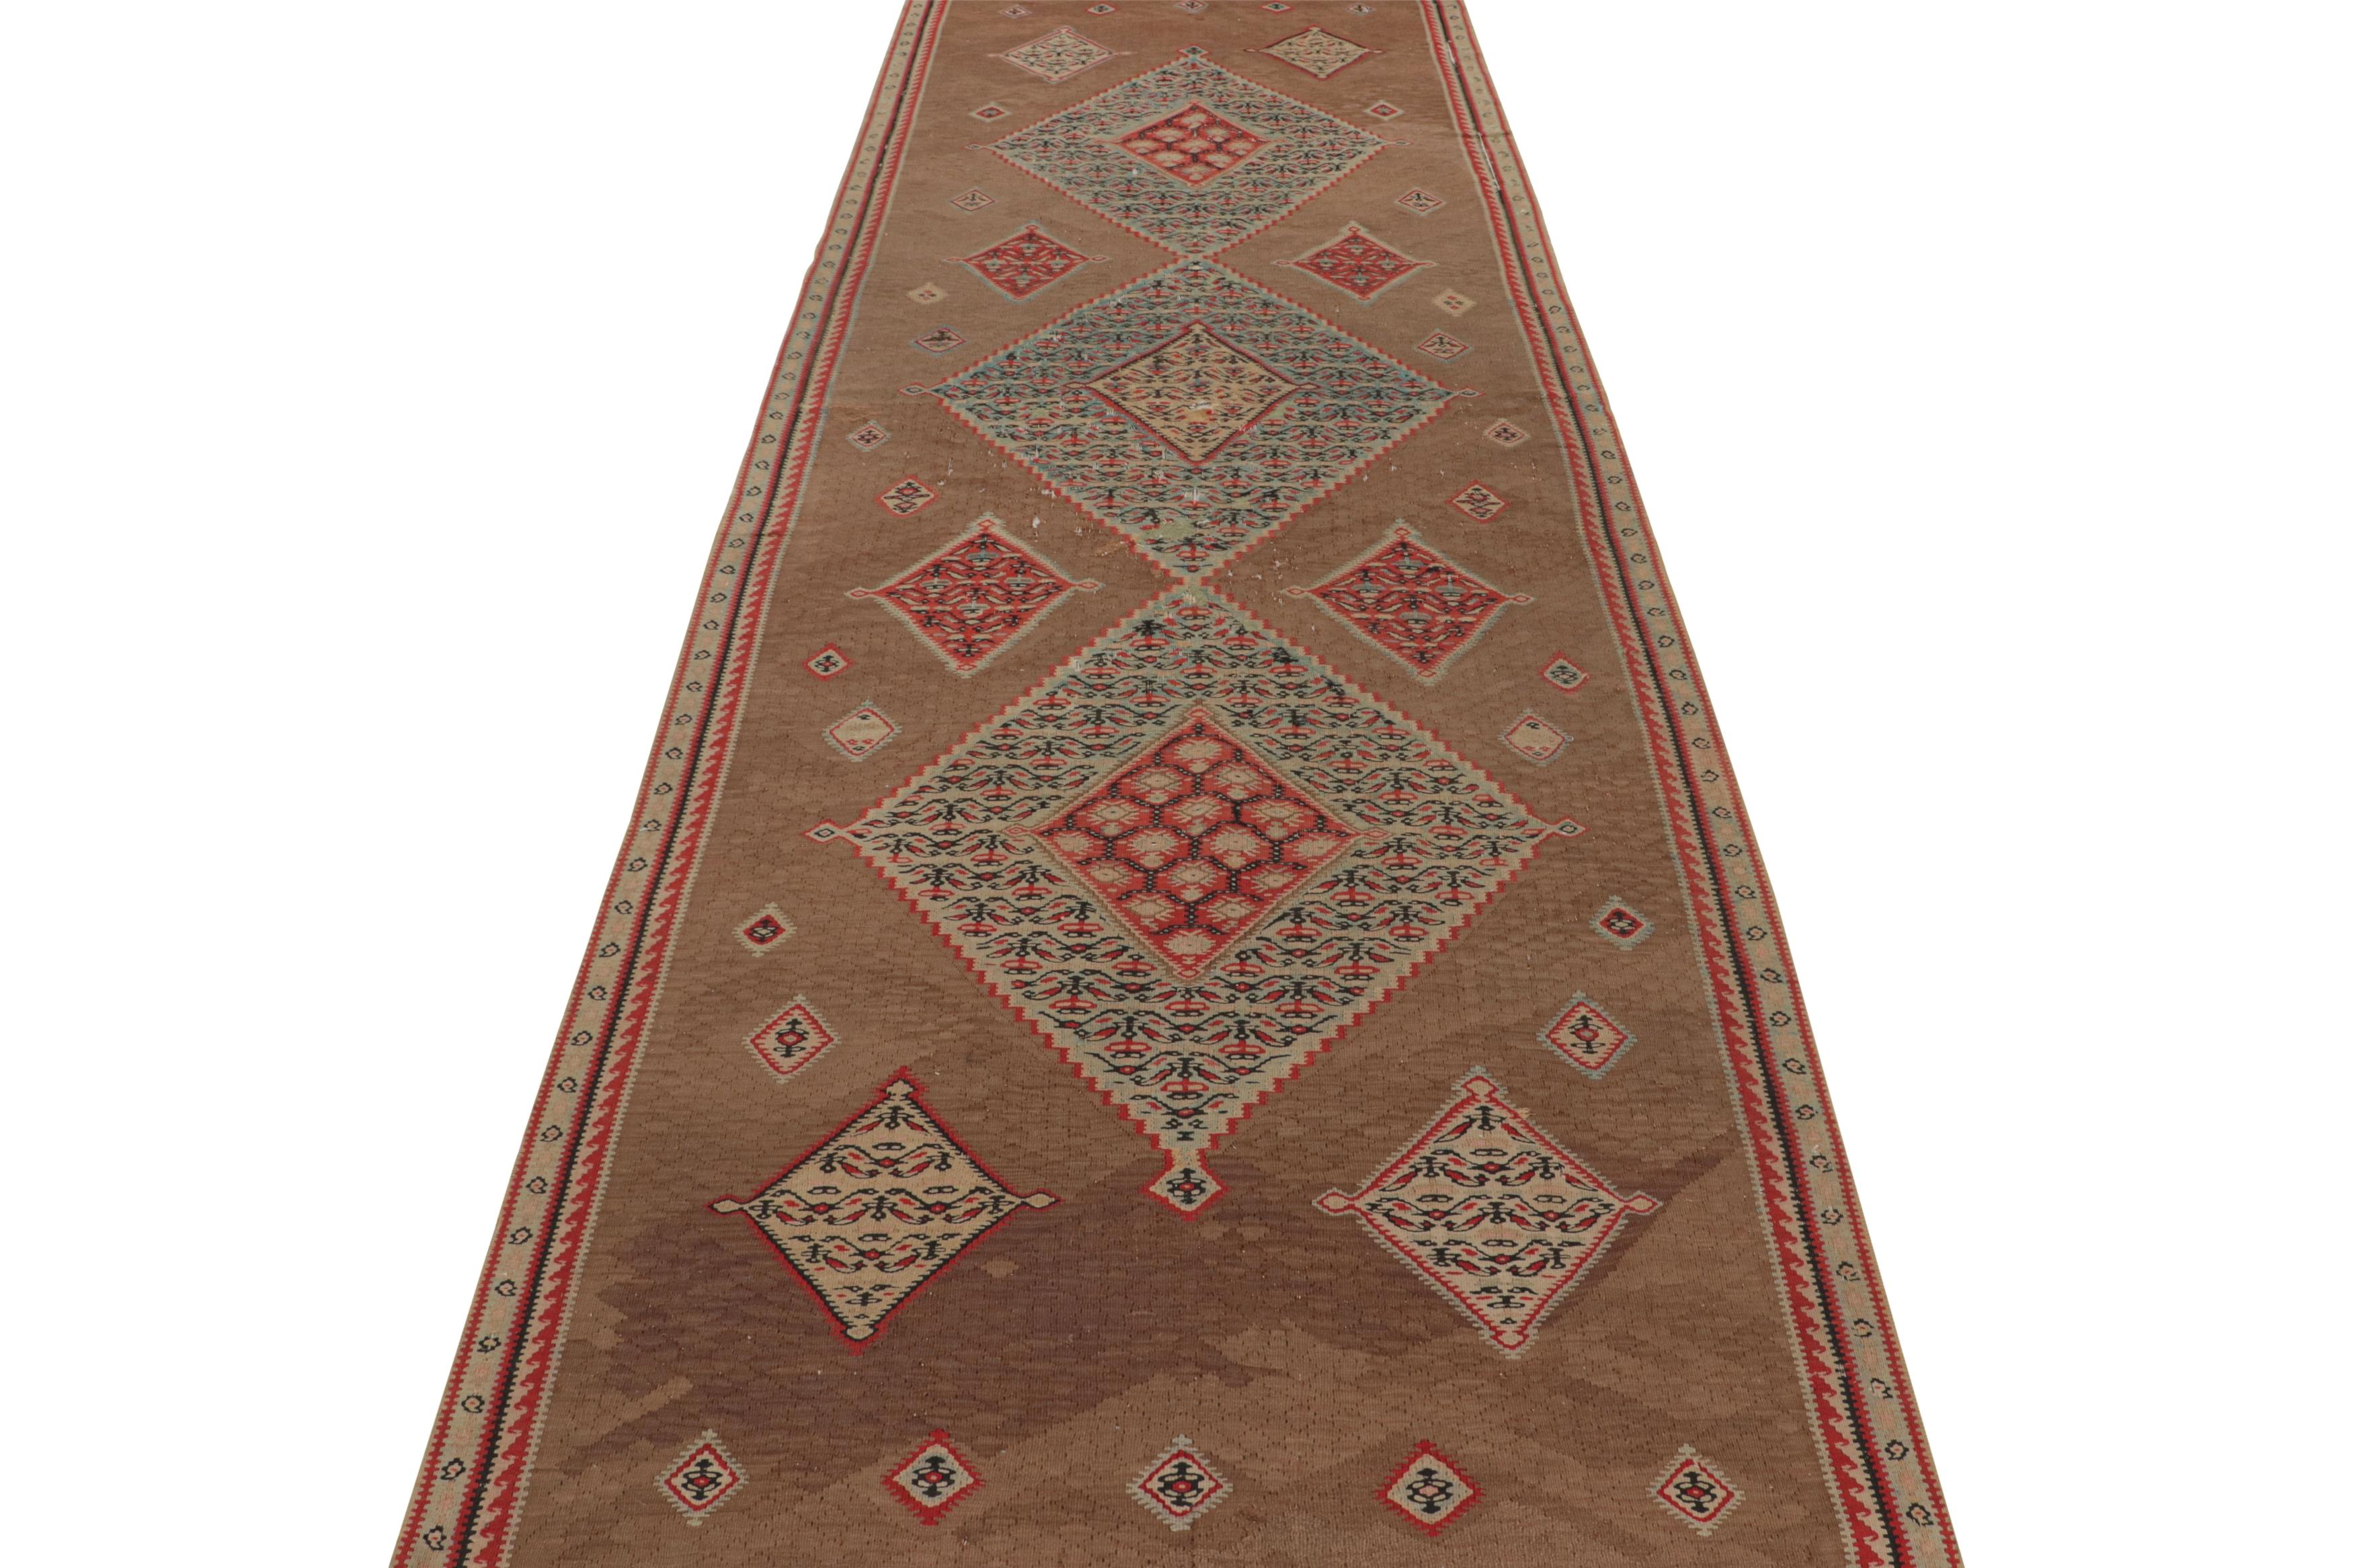 Late 19th Century Antique Geometric Beige and Red Wool Persian Kilim-Senneh Runner by Rug & Kilim For Sale